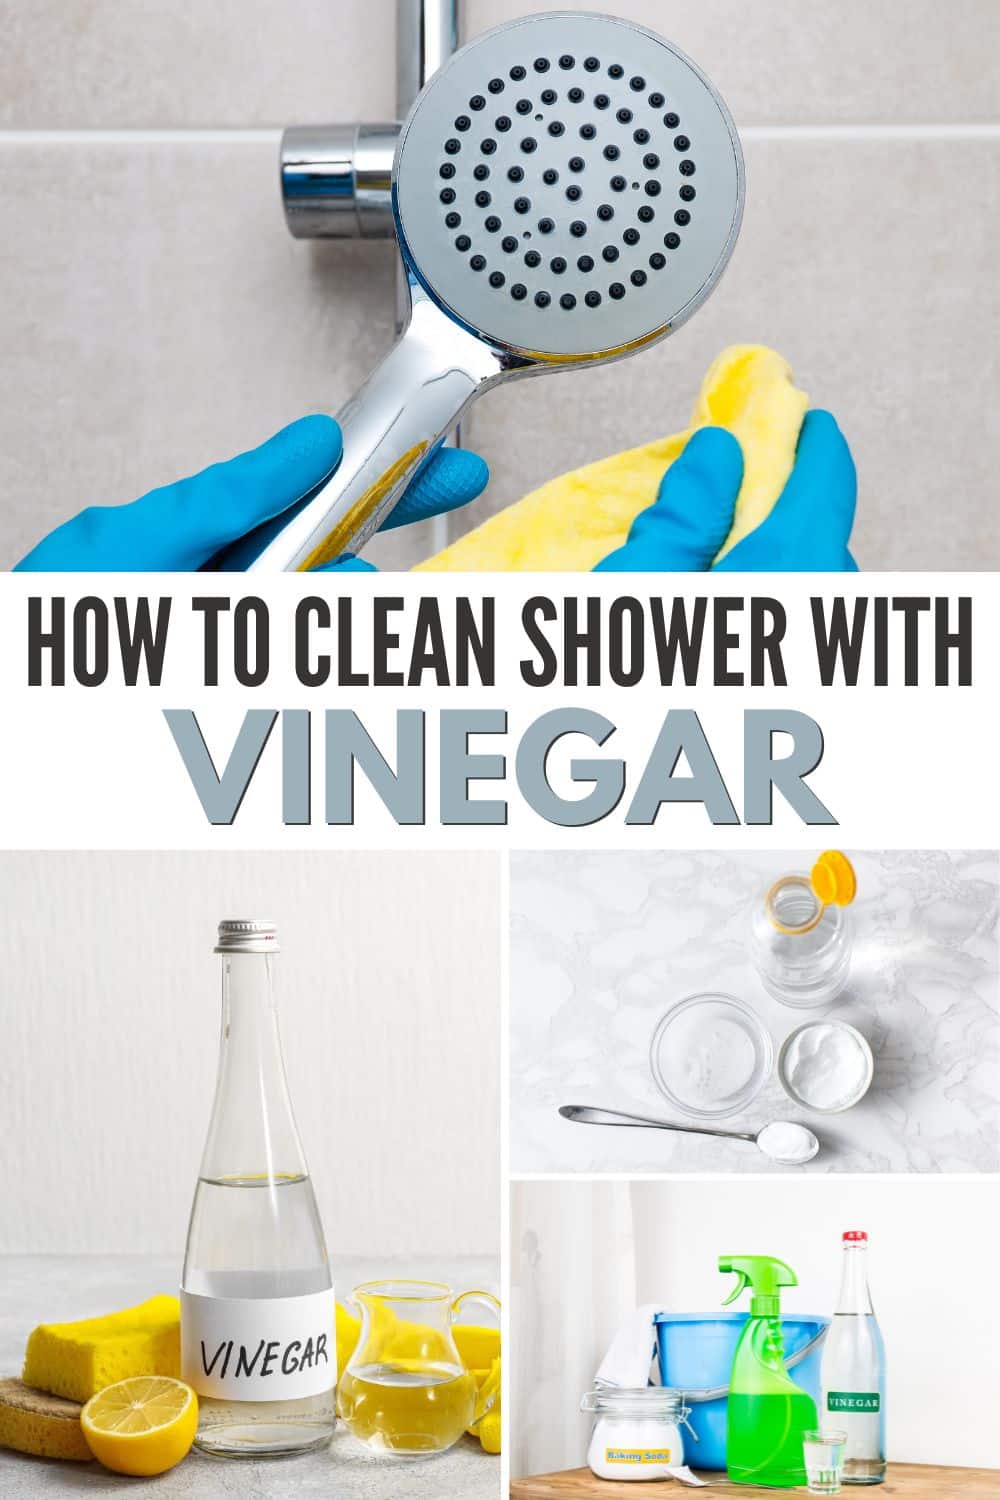 Discover the best technique for cleaning a shower with vinegar efficiently.